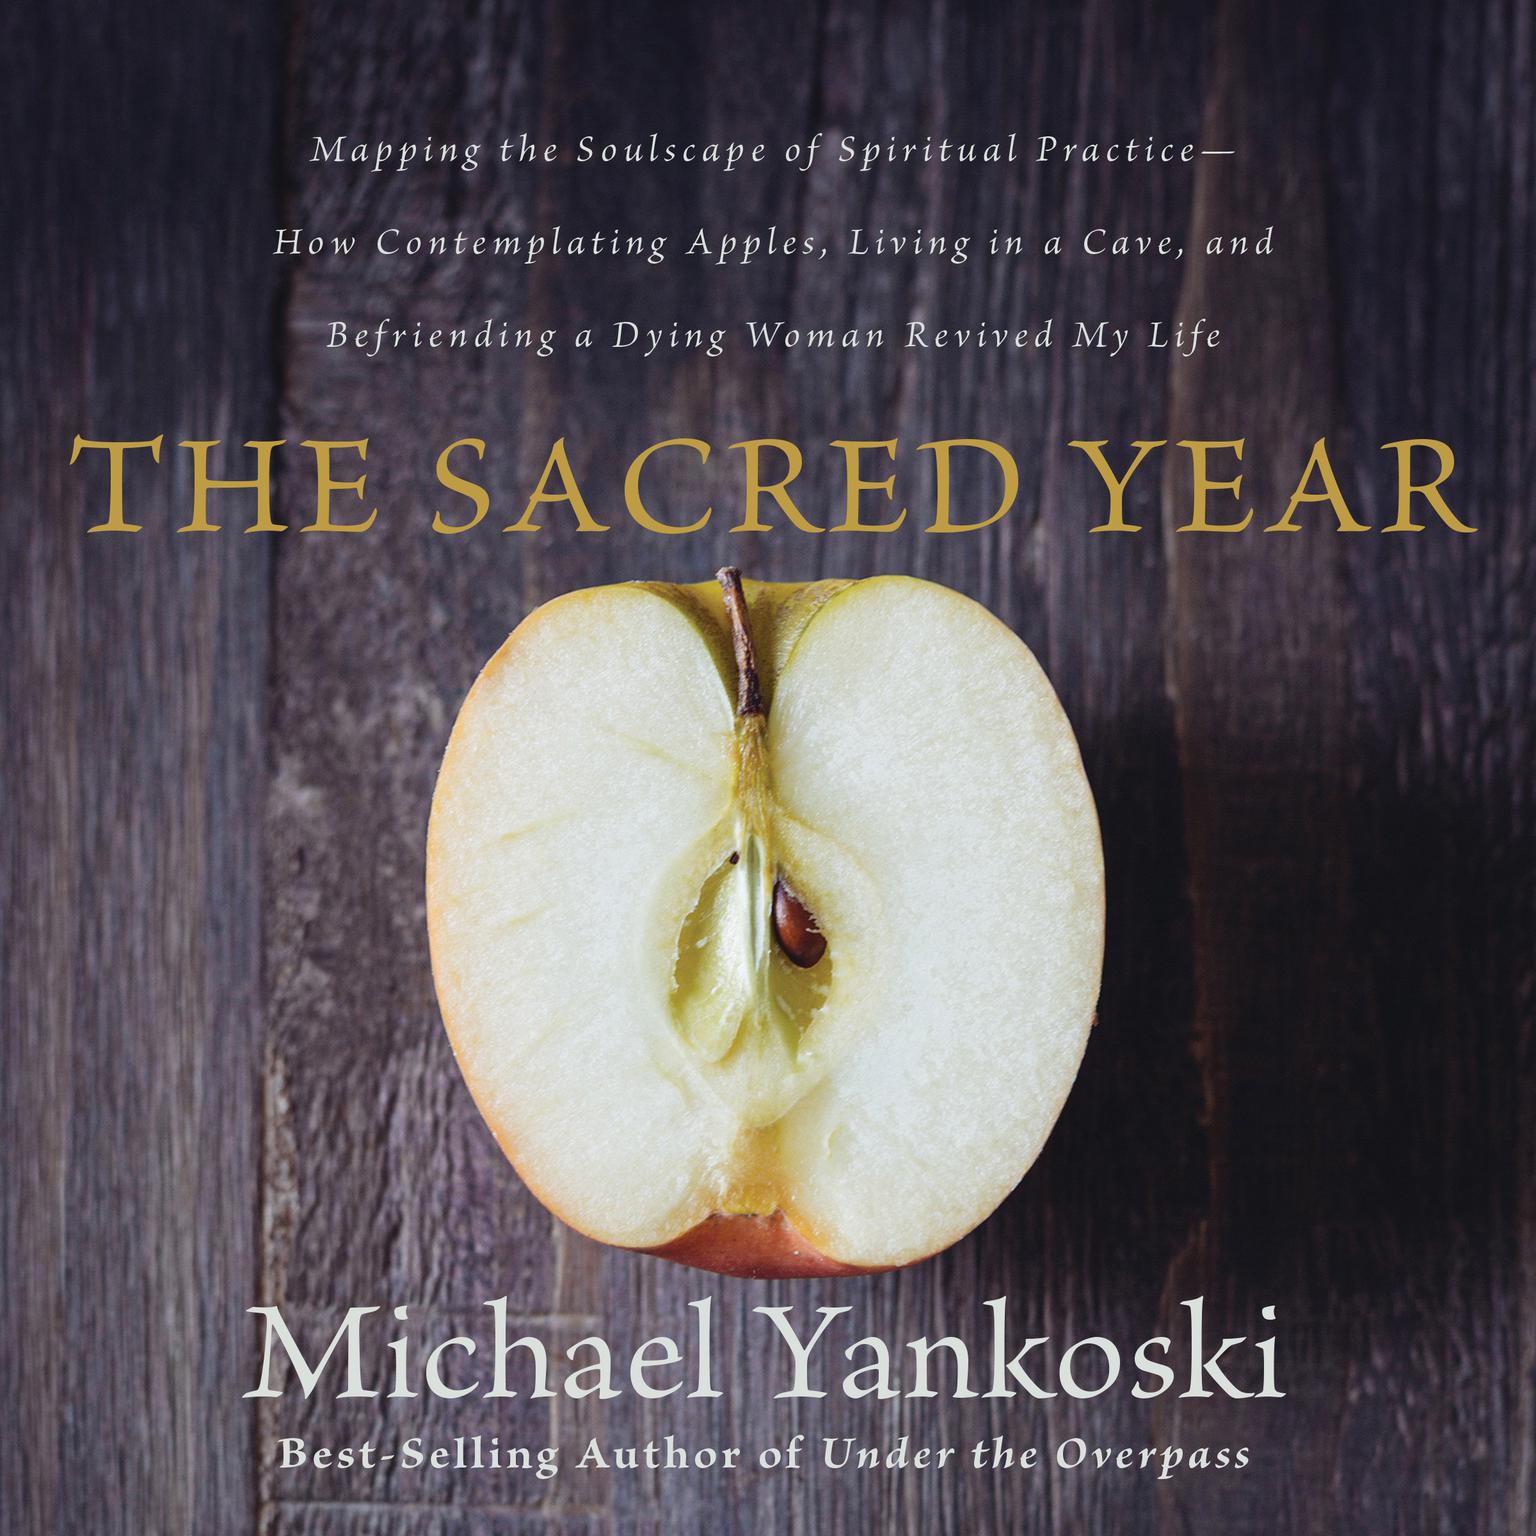 The Sacred Year: Mapping the Soulscape of Spiritual Practice—How Contemplating Apples, Living in a Cave and Befriending a Dying Woman Revived My Life Audiobook, by Michael Yankoski